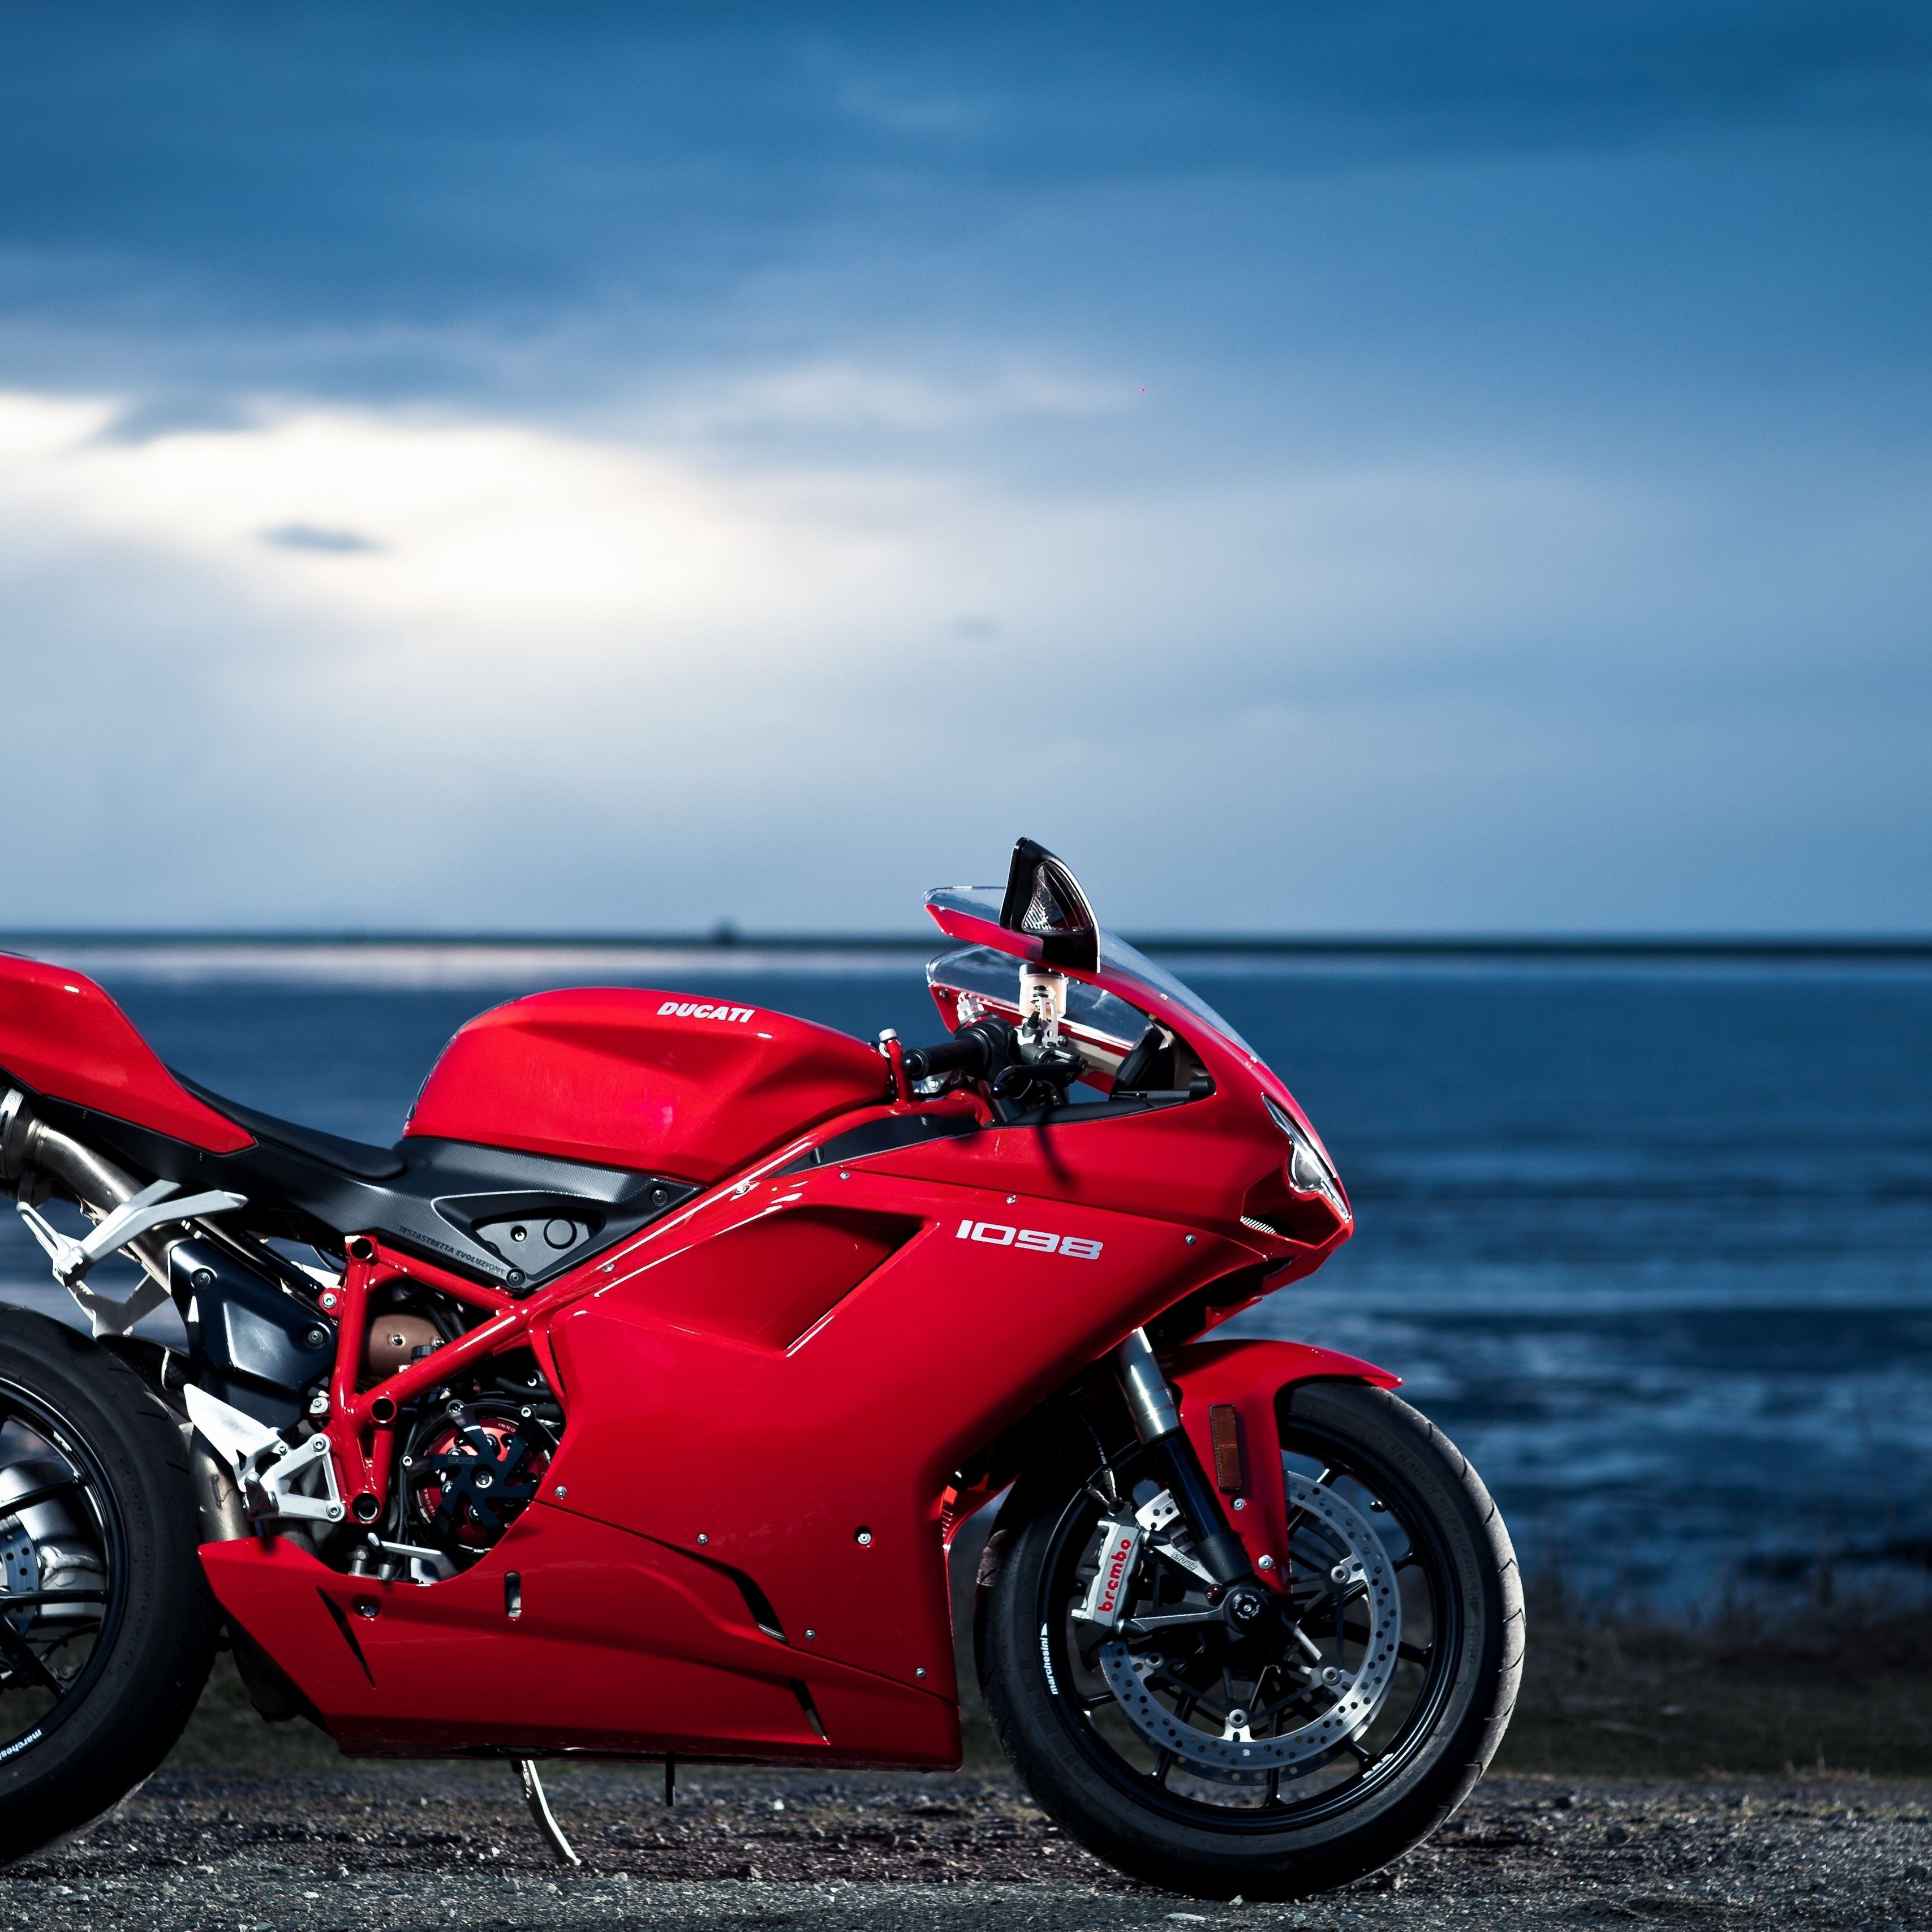 Download wallpaper 3415x3415 ducati, motorcycle, sea, red ipad pro 12.9 retina for parallax HD background